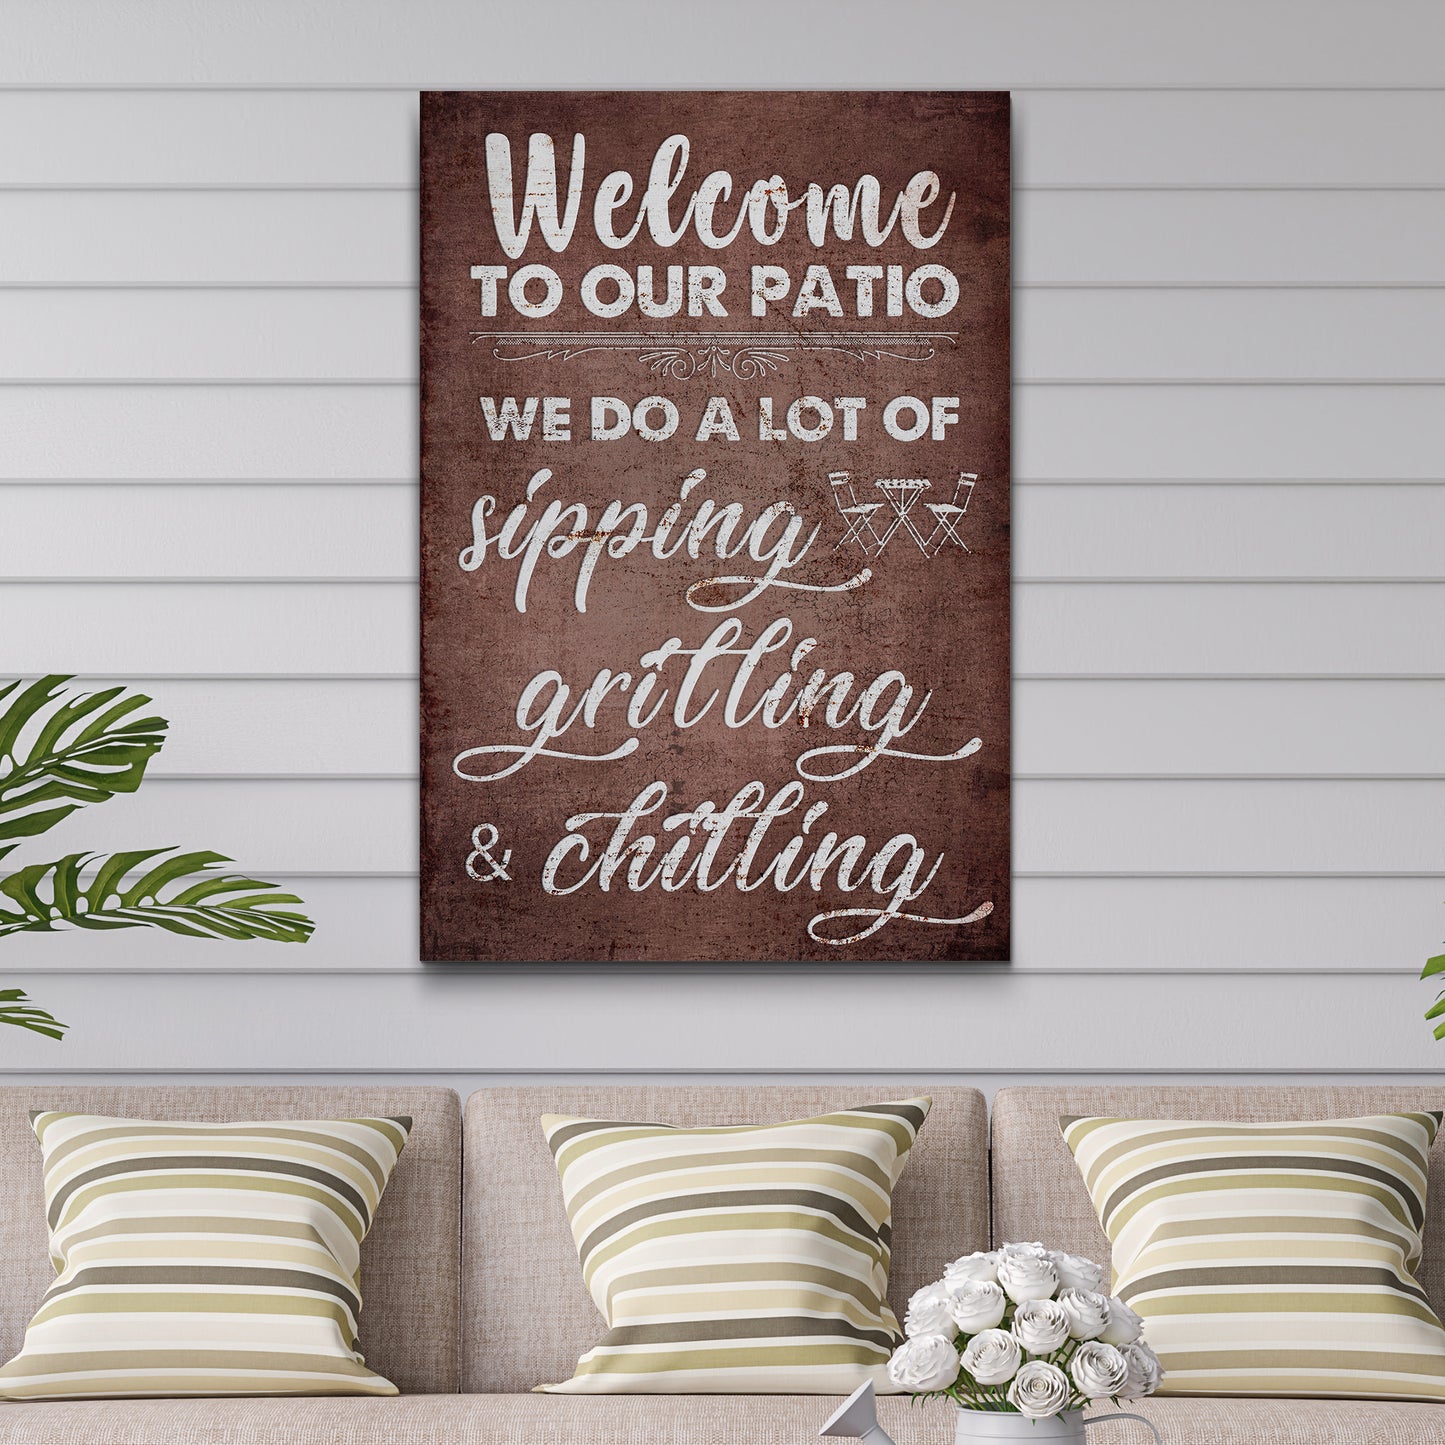 Patios Are Made For Sipping, Grilling And Chilling Sign II - Image by Tailored Canvases